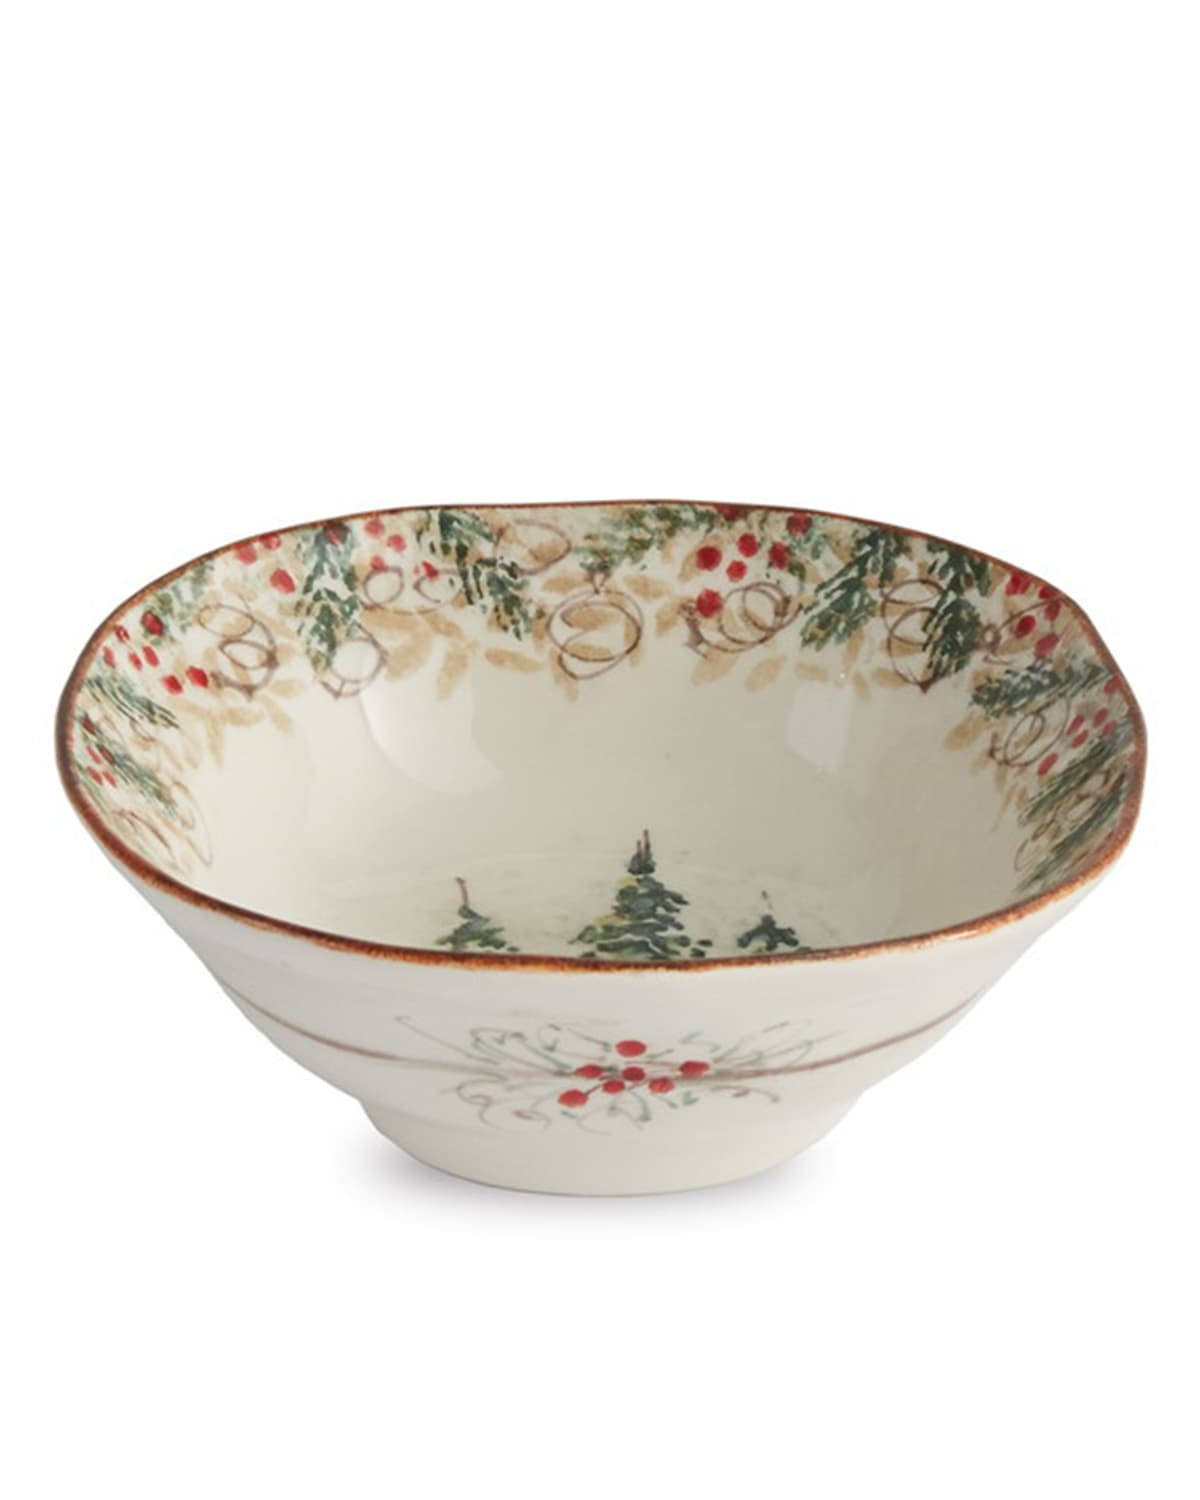 Arte Italica Burano with Handles Footed Bowl